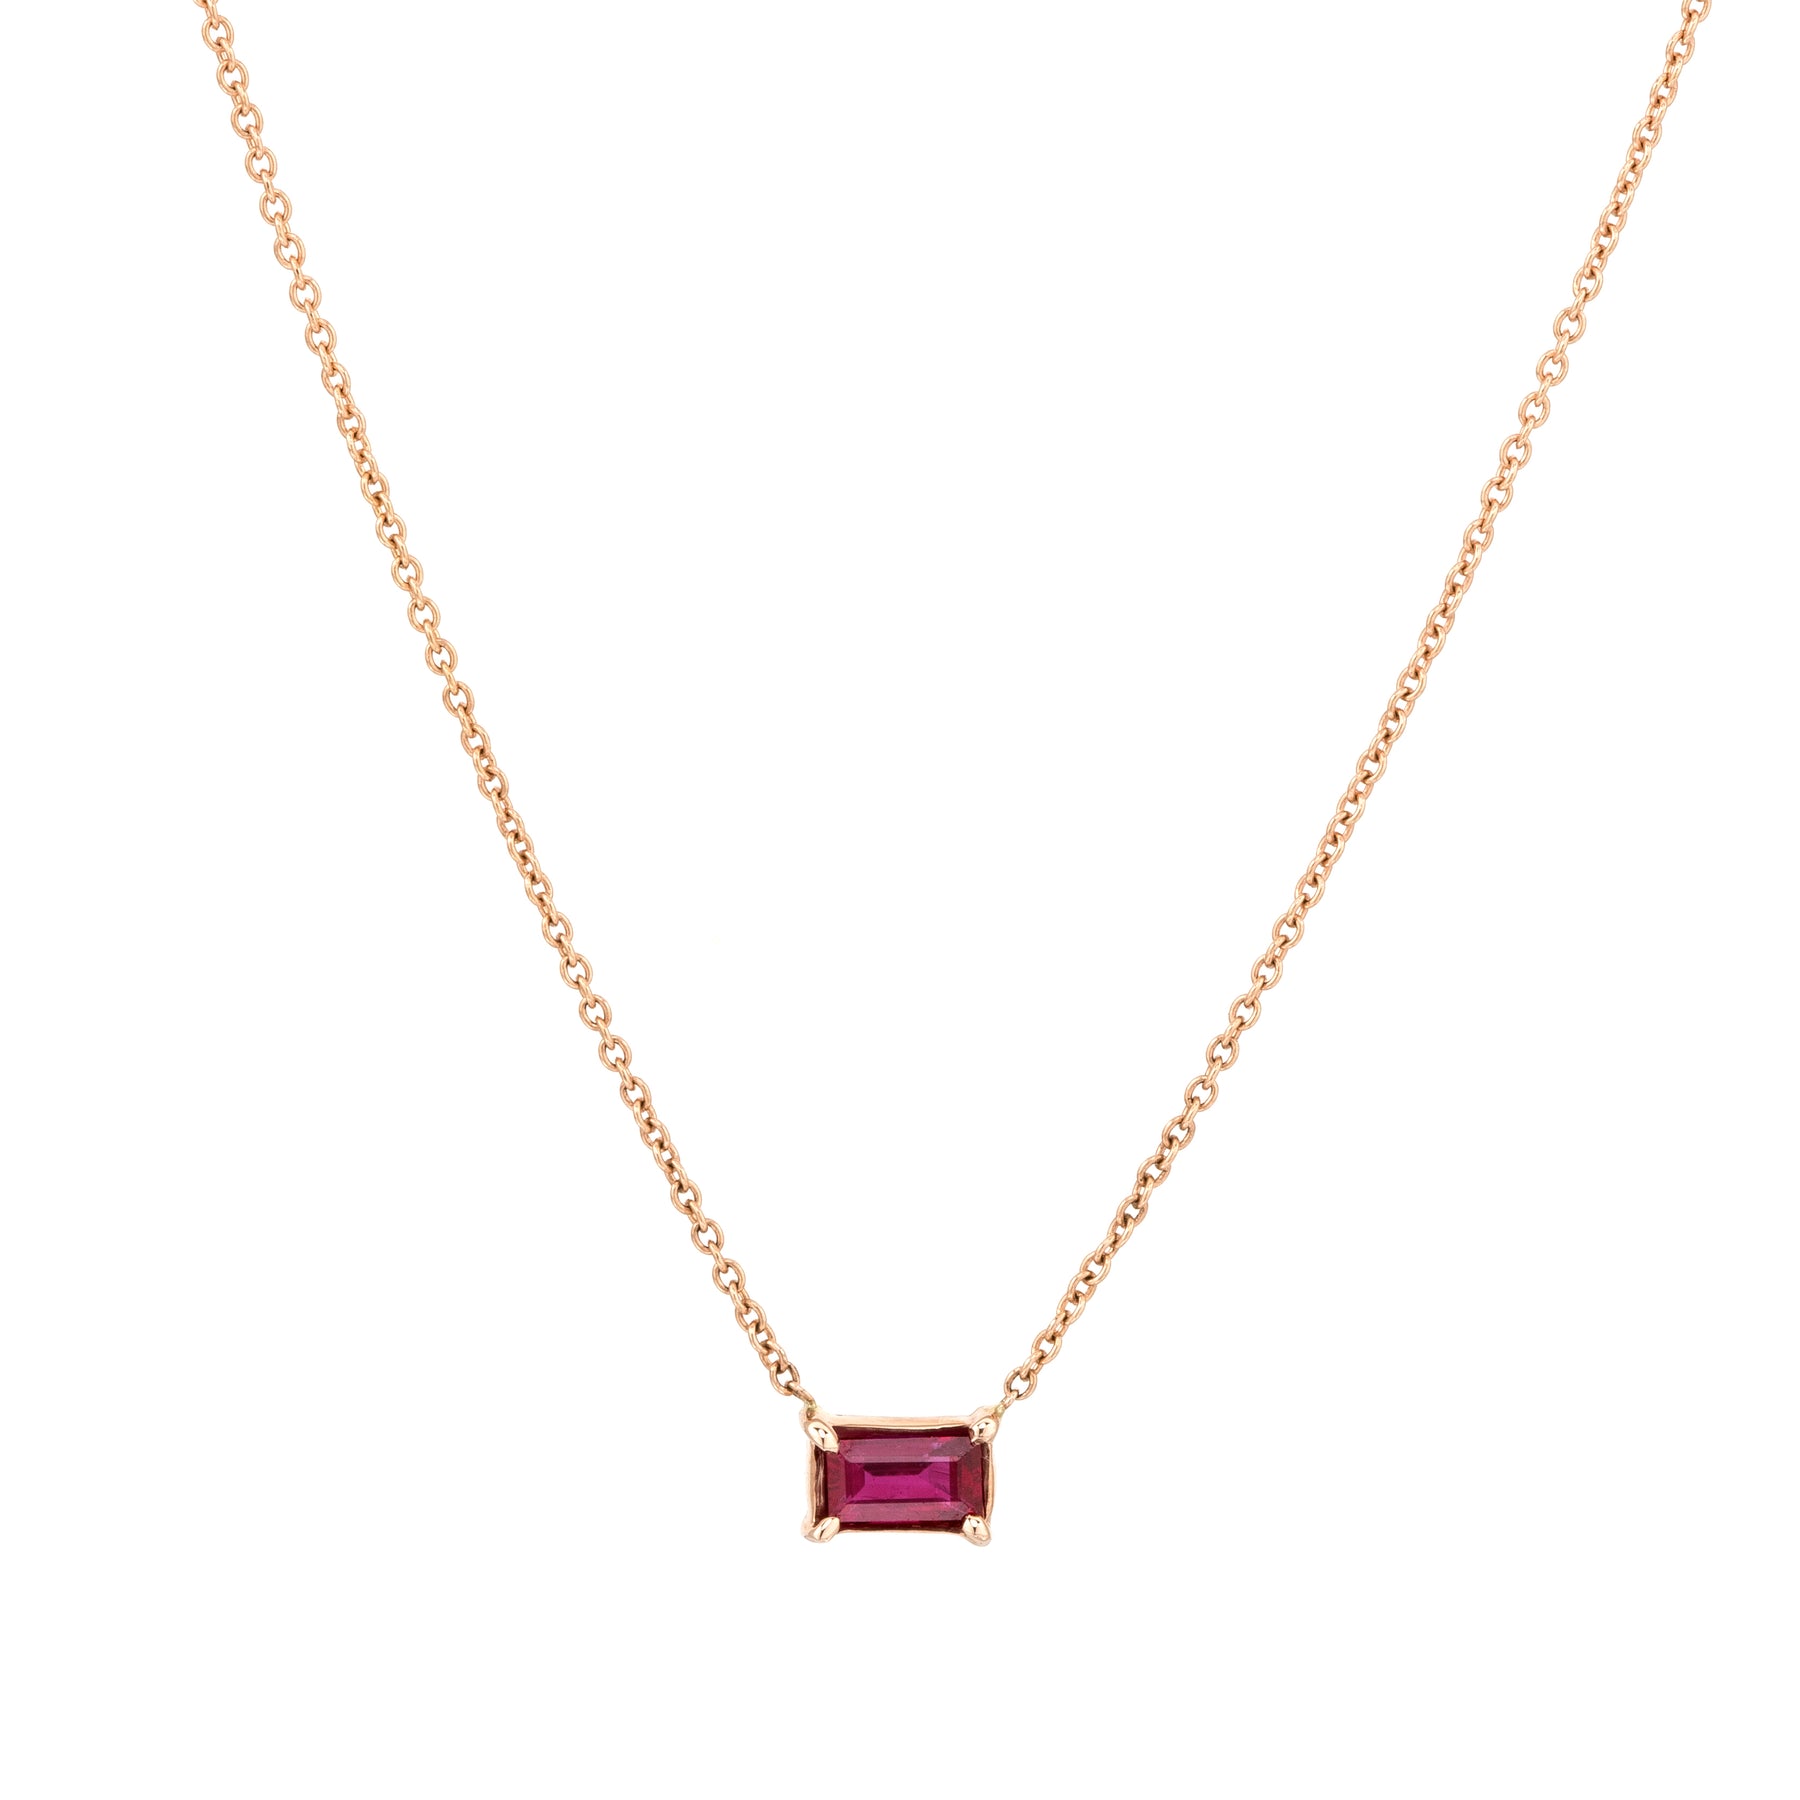 Ruby Baguette Necklace - Nina Segal Jewelry